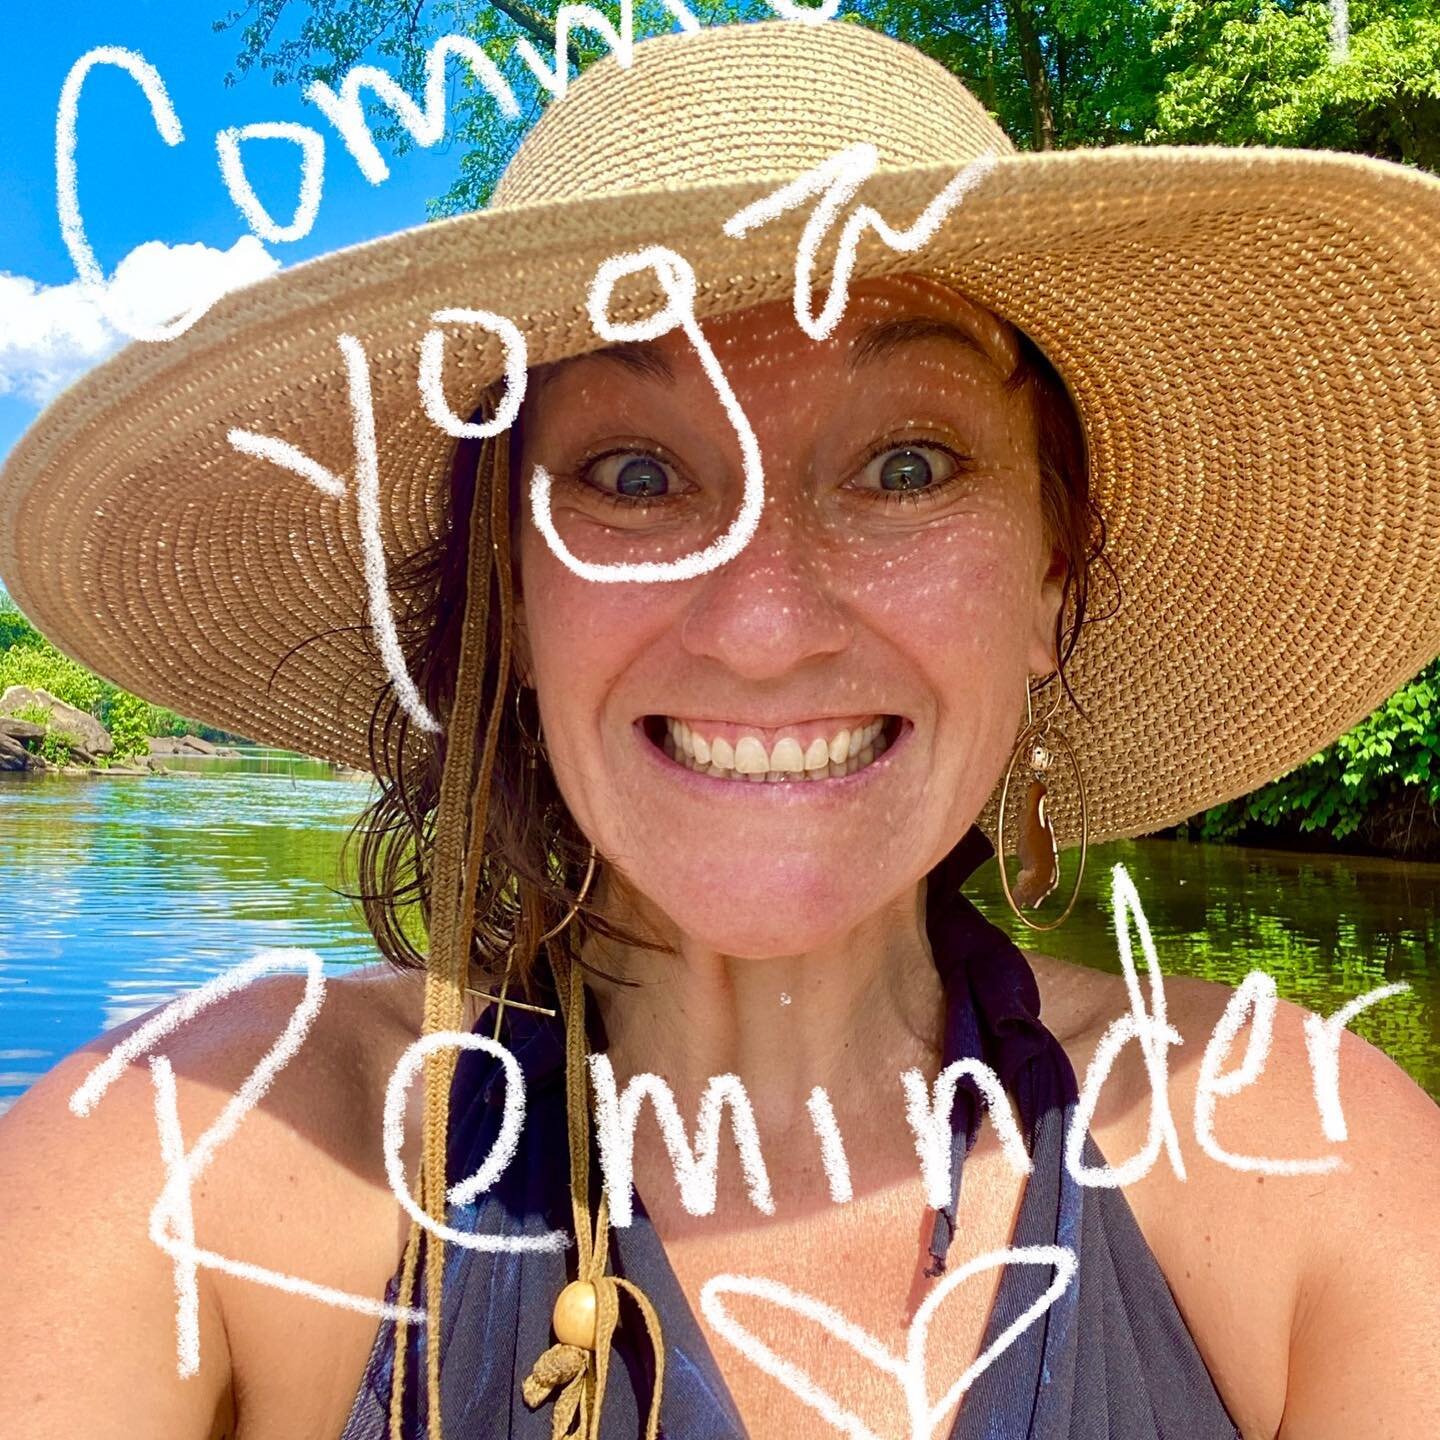 Tomorrow will be my last week at Community Yoga until I don&rsquo;t know when? But the show will go on without me! The beauty-full Maria Starr and other knowledgeable, kind-hearted Yogis like @adistrigl @pnkrckhippie and @happelcorey will be Teaching